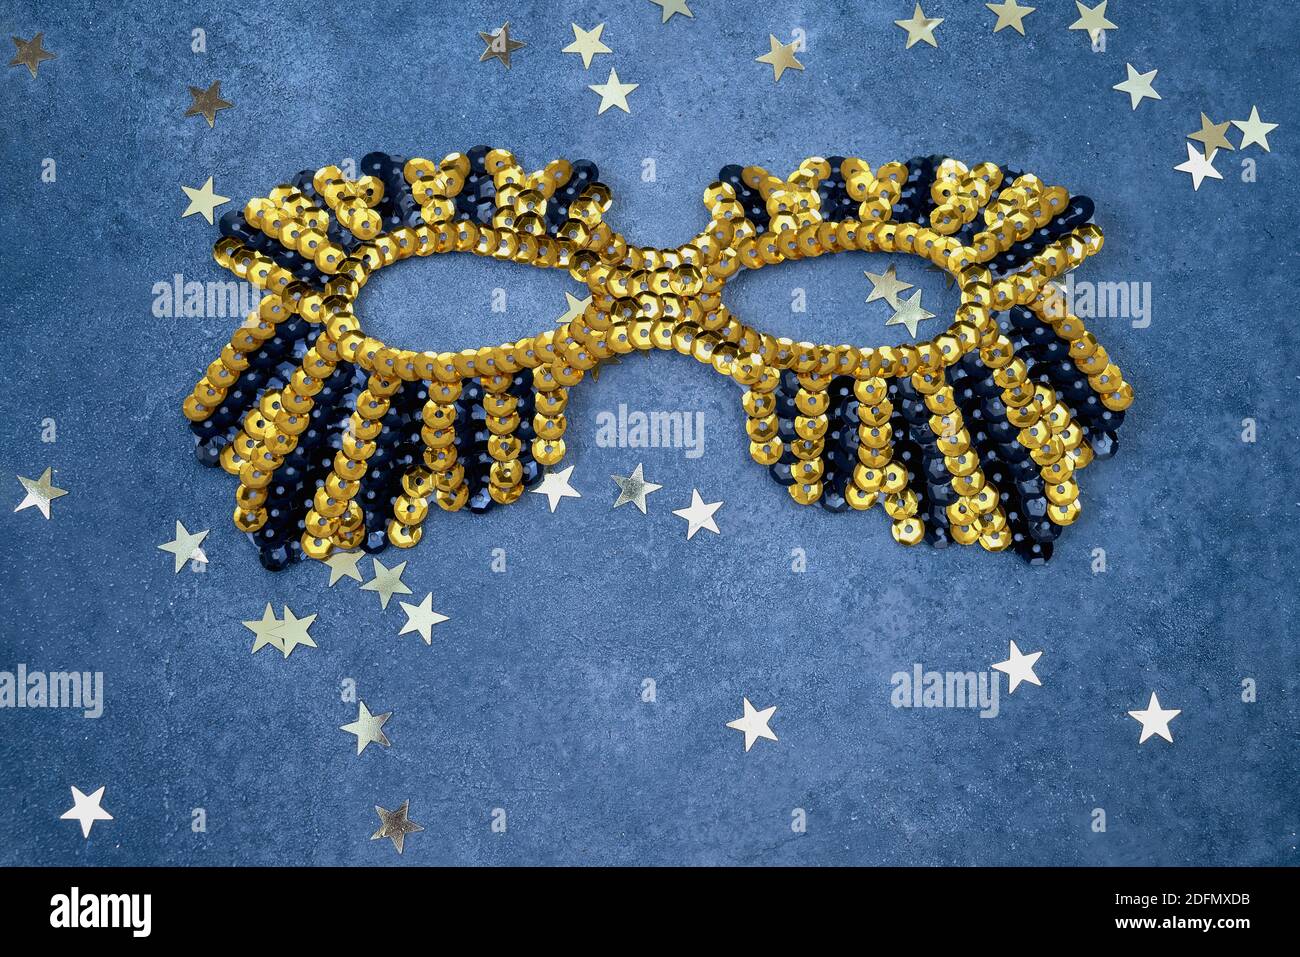 Golden glittering mask with golden stars on a blue background. Top view, copy space. Carnival party celebration concept. Stock Photo